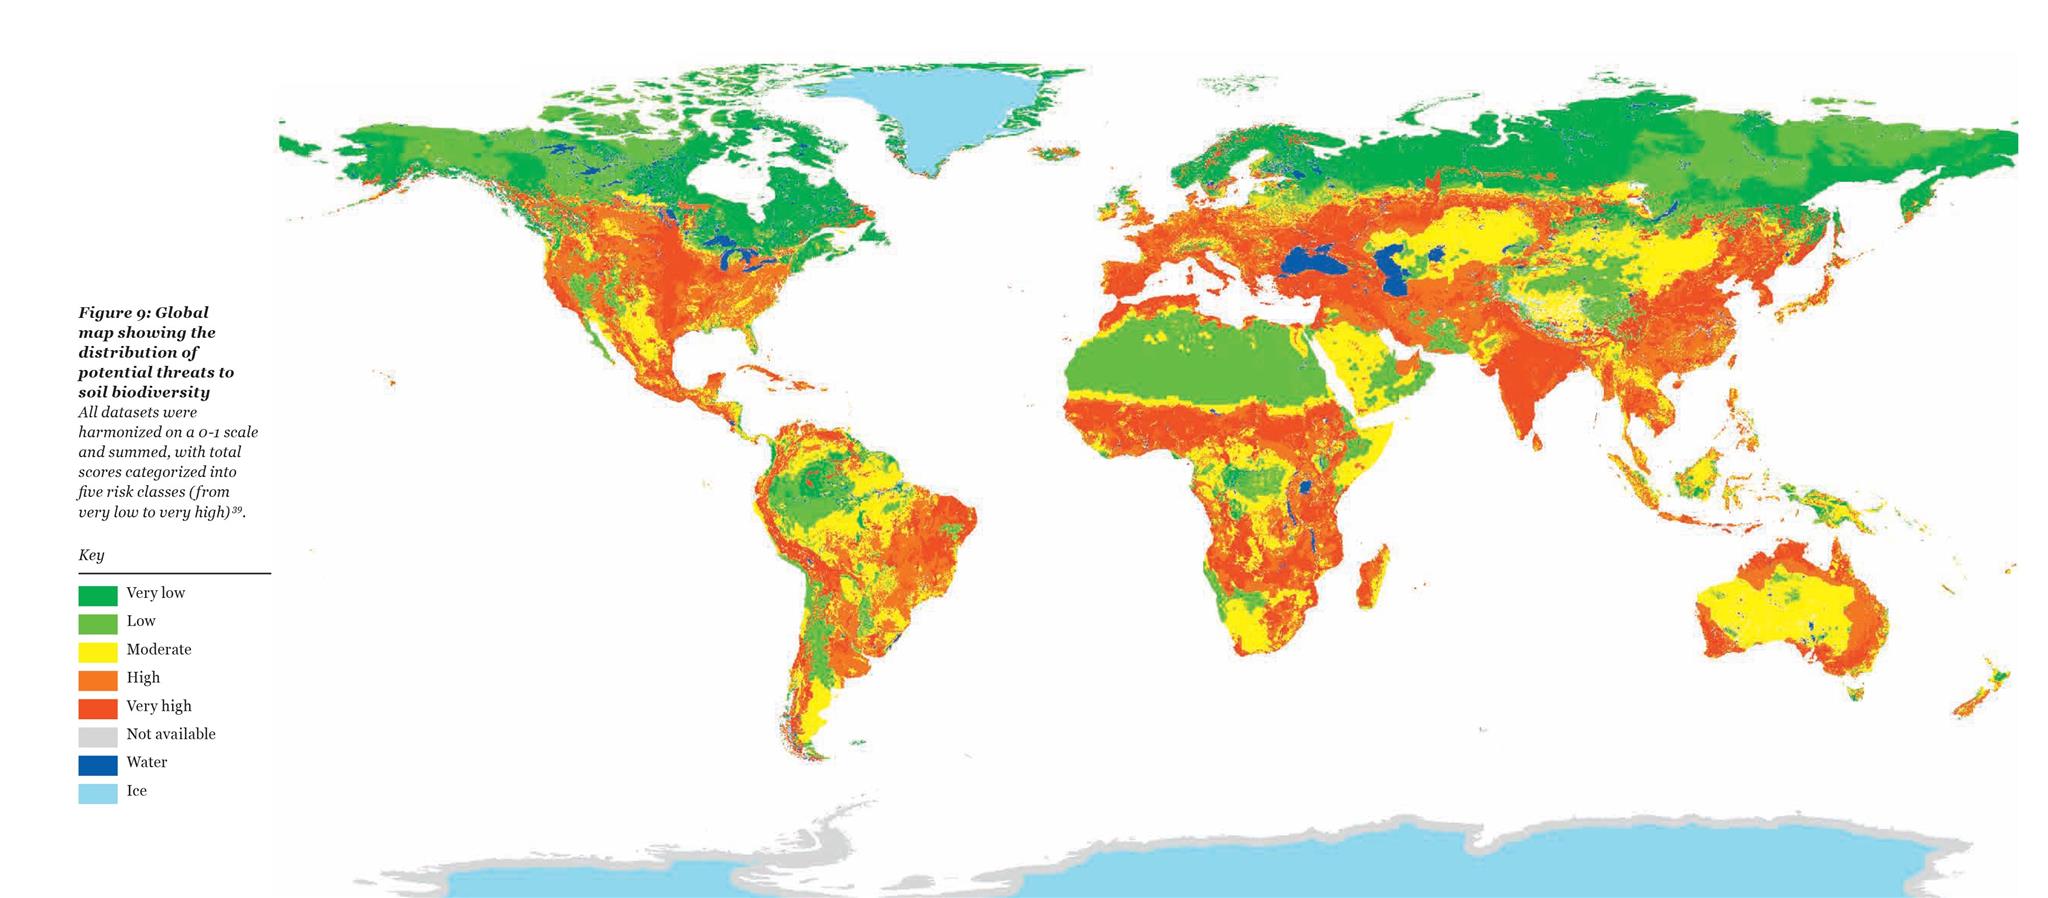 5 Maps By WWF Show What’s Wrong With The World